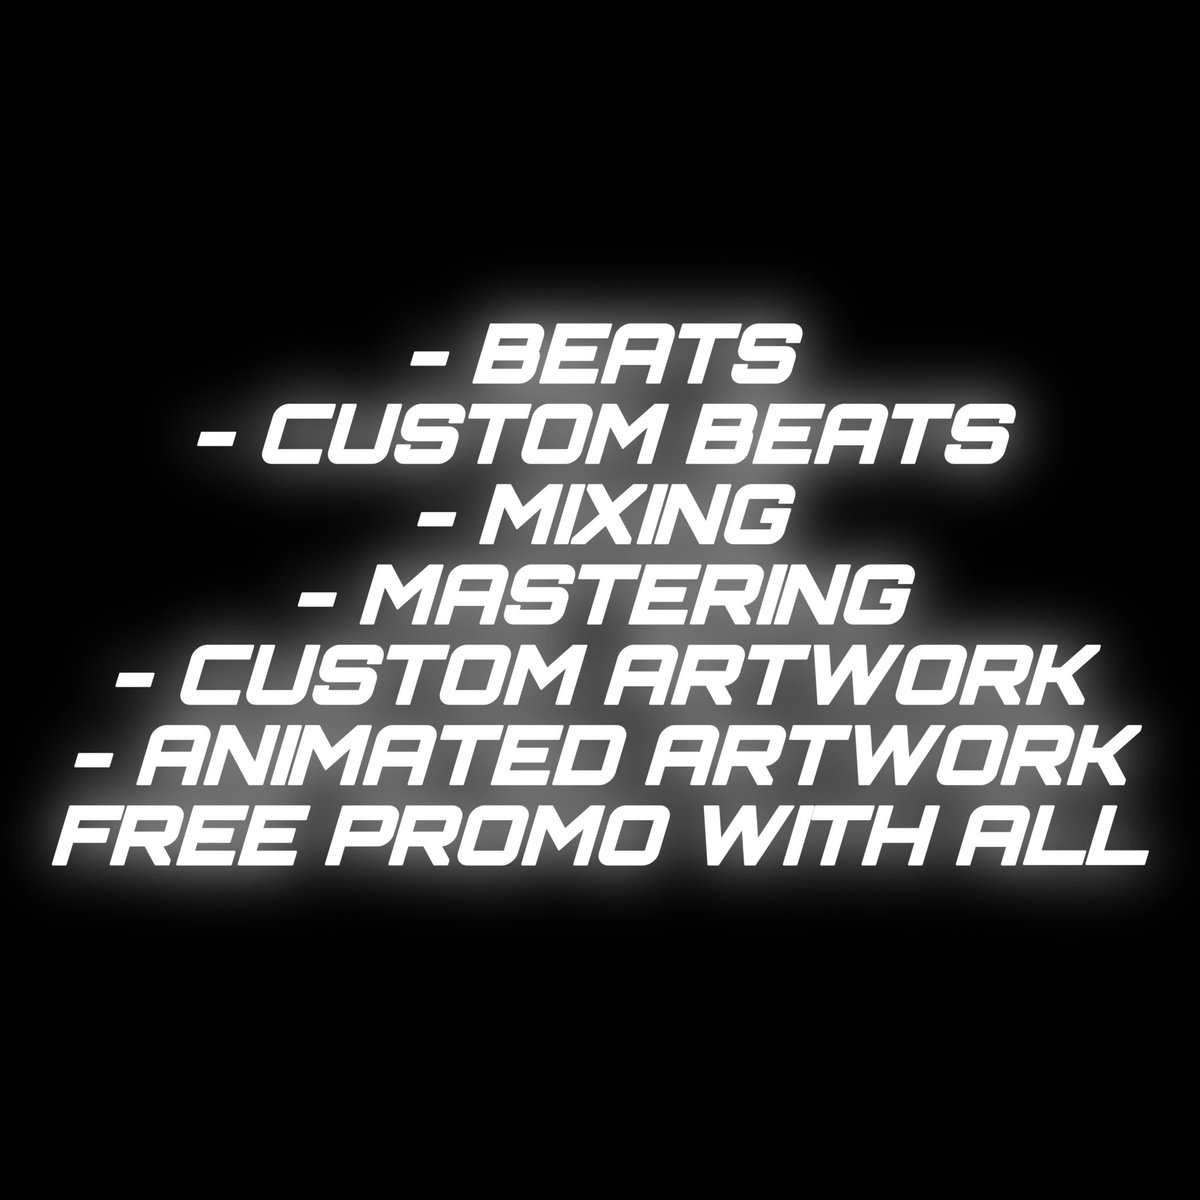 Working with all budgets💲🔥🔊

#rap #hiphop #indierap #rapper #producer #nftmusic #nftartist #nftcommunity #beats #custom